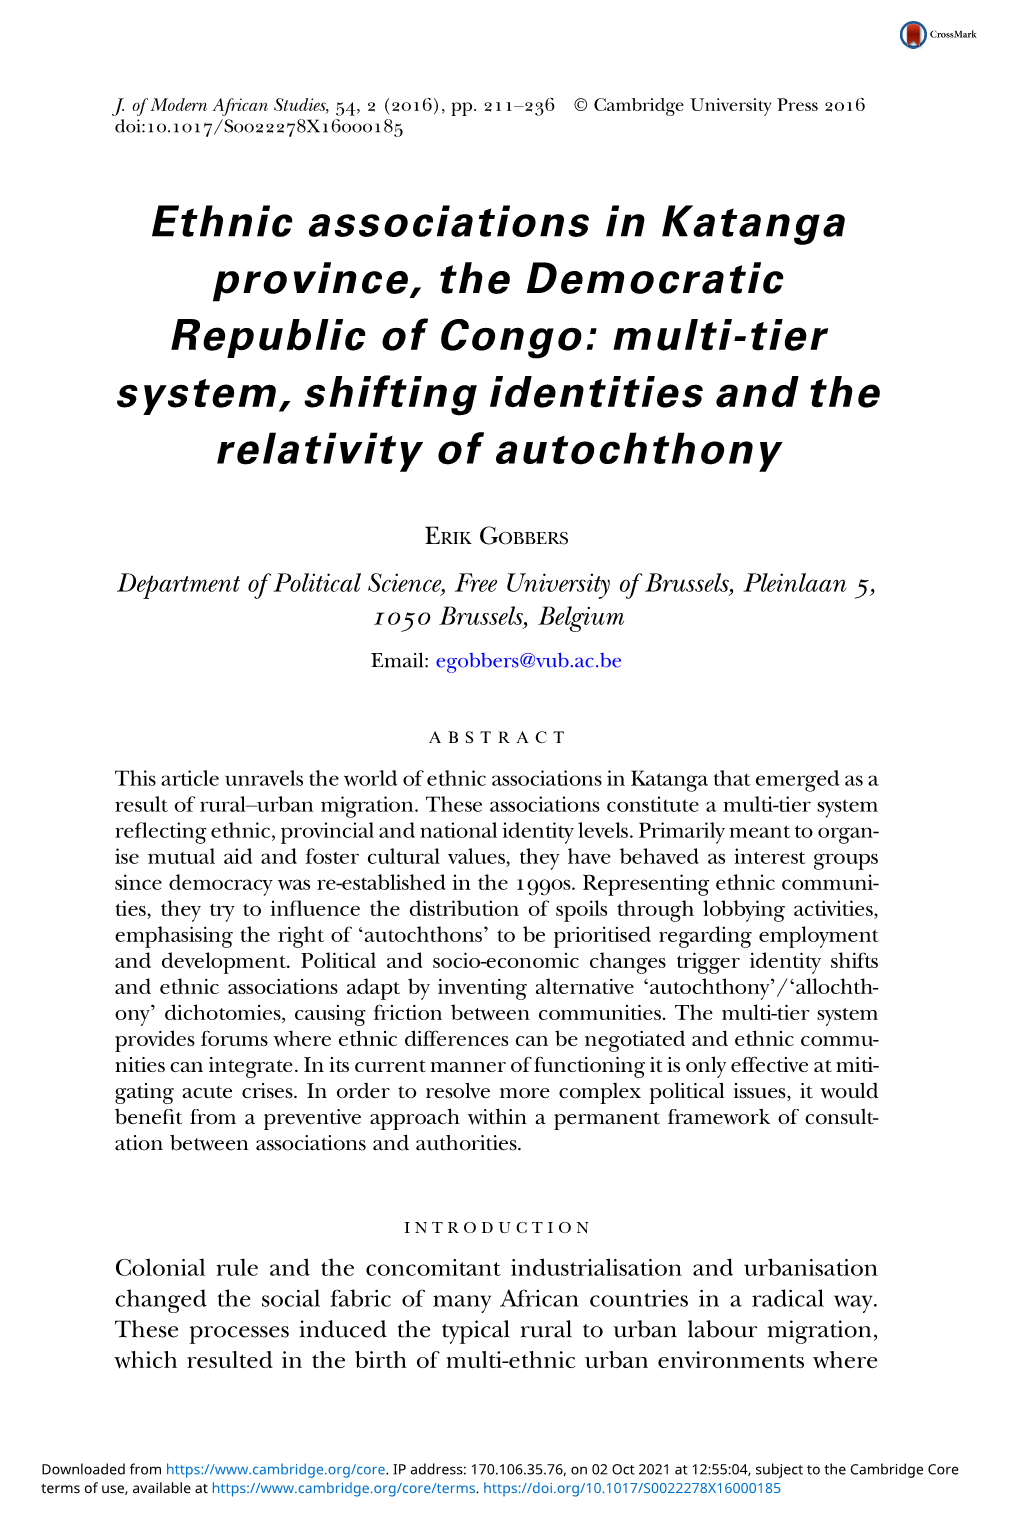 Ethnic Associations in Katanga Province, the Democratic Republic of Congo: Multi-Tier System, Shifting Identities and the Relativity of Autochthony